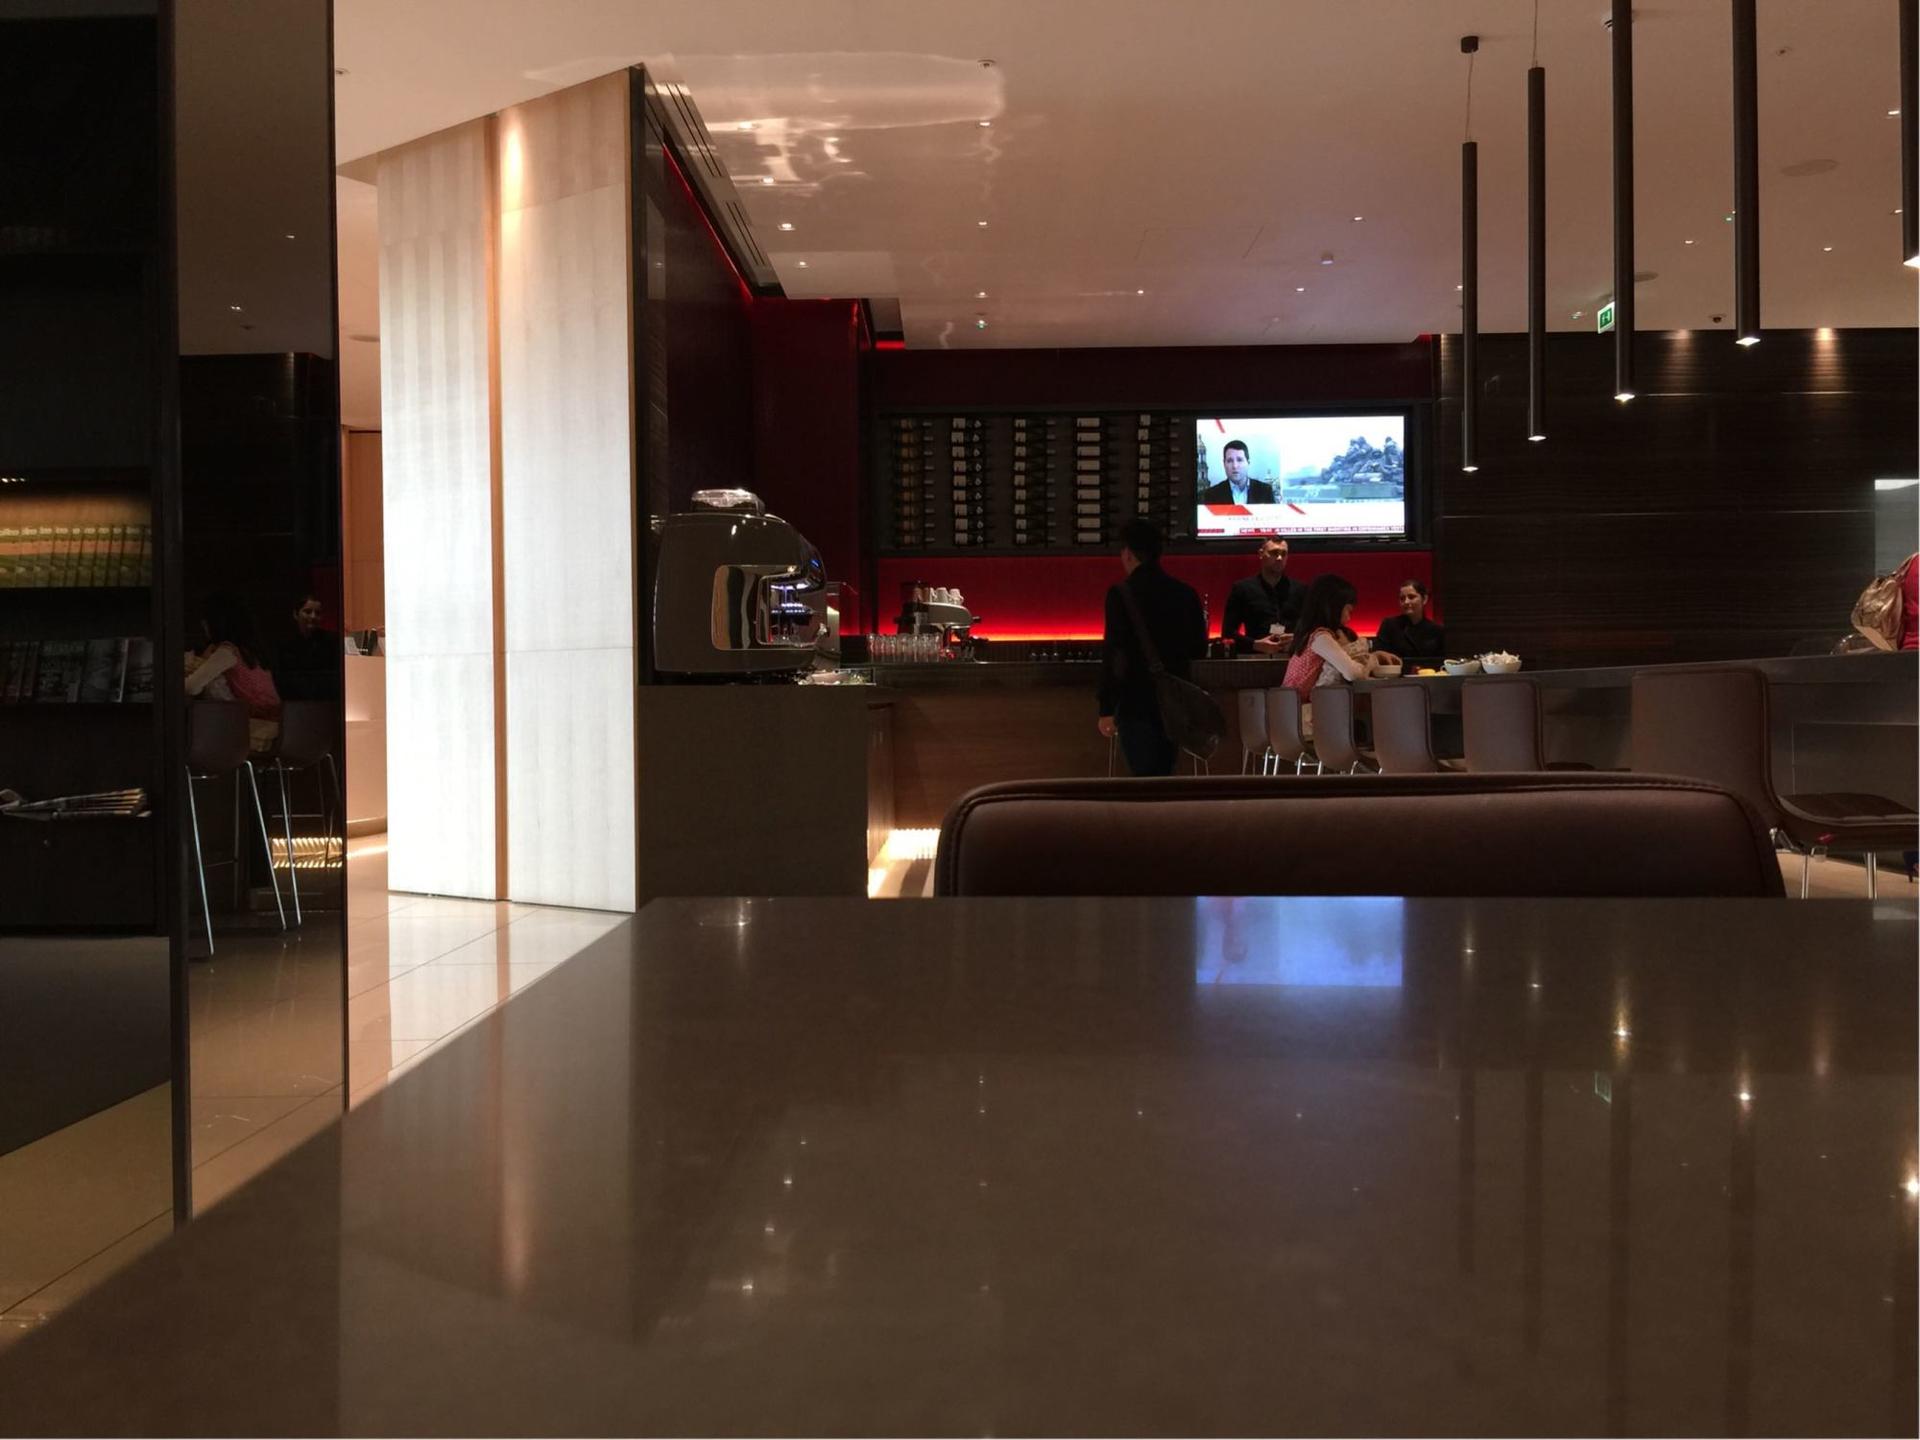 Air Canada Maple Leaf Lounge image 18 of 27